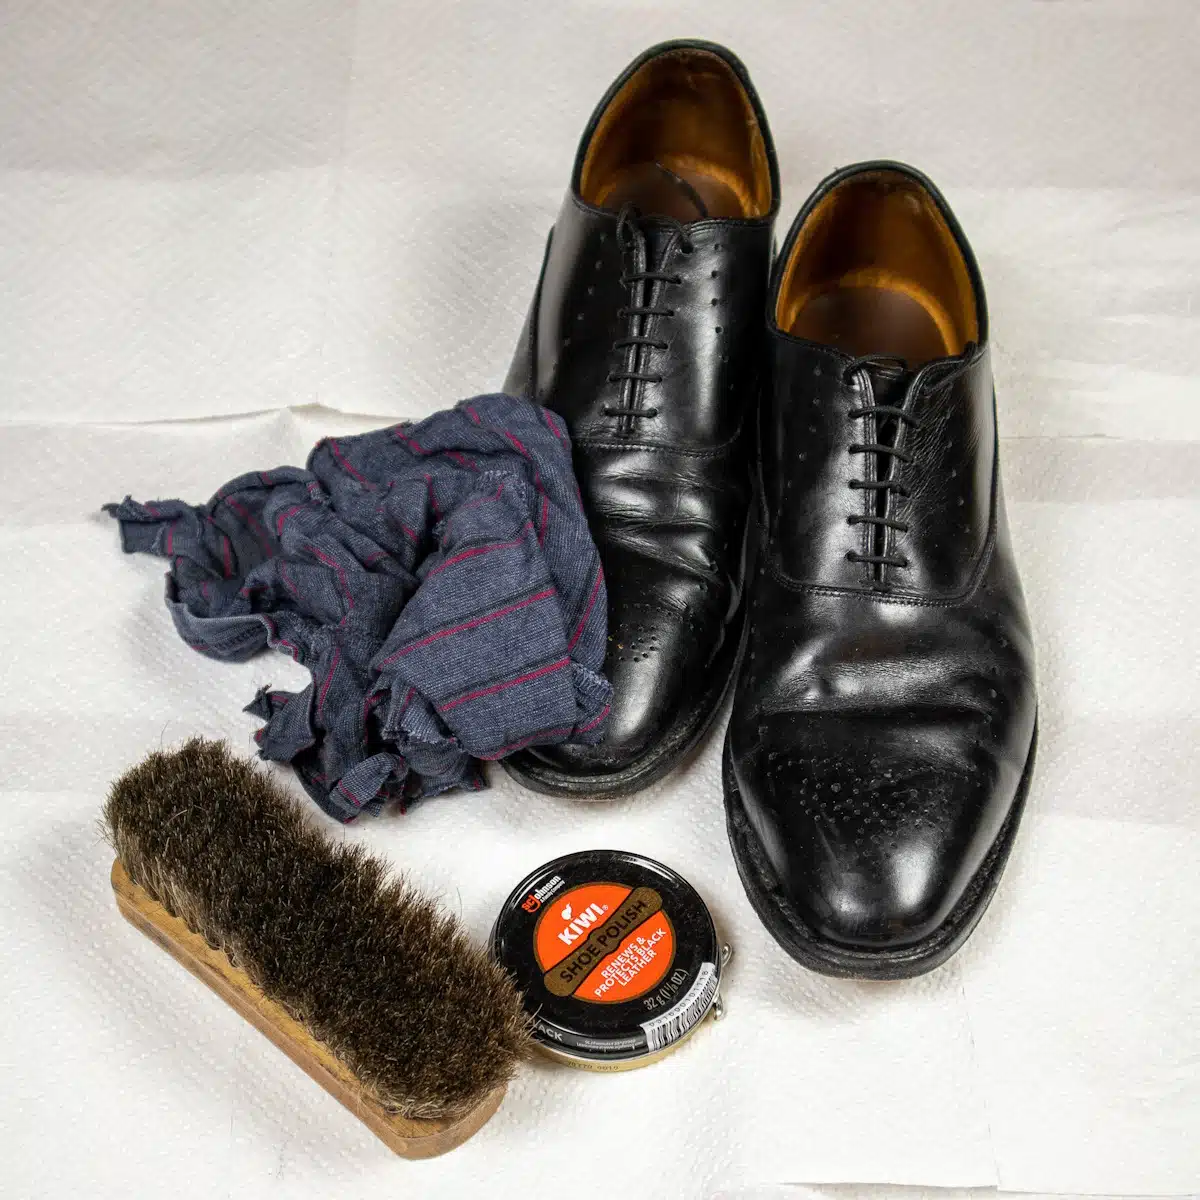 Shoe Cream and Shoe Wax: What They Do and How to Use Them